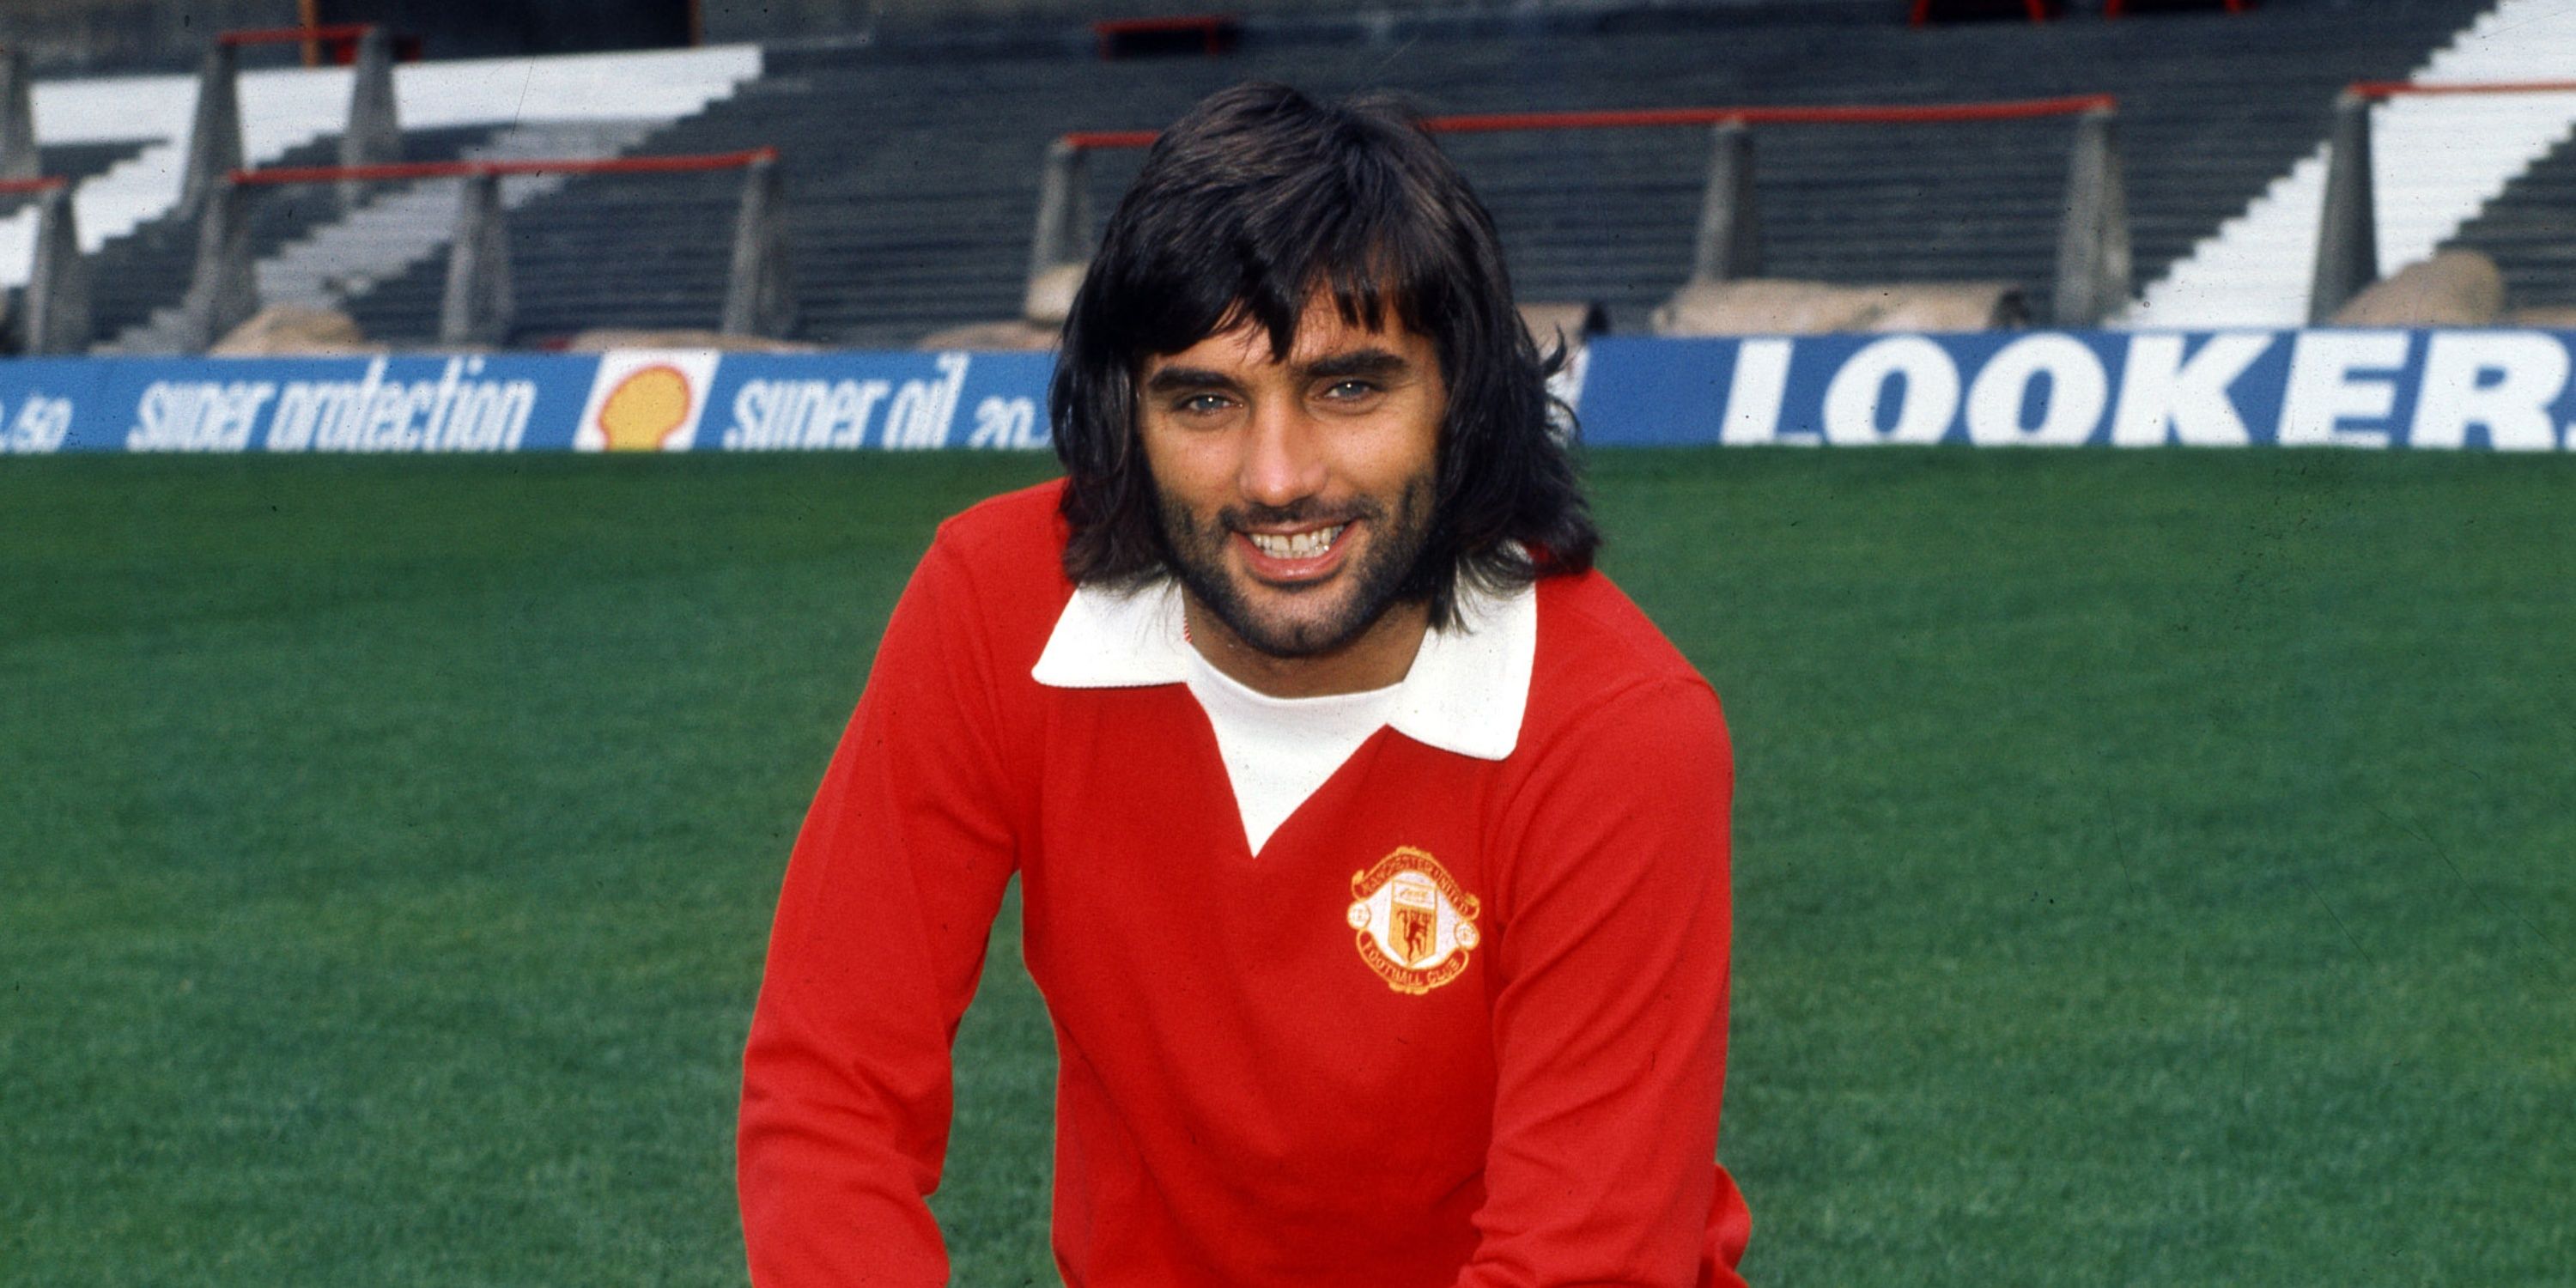 Manchester United's George Best smiling.